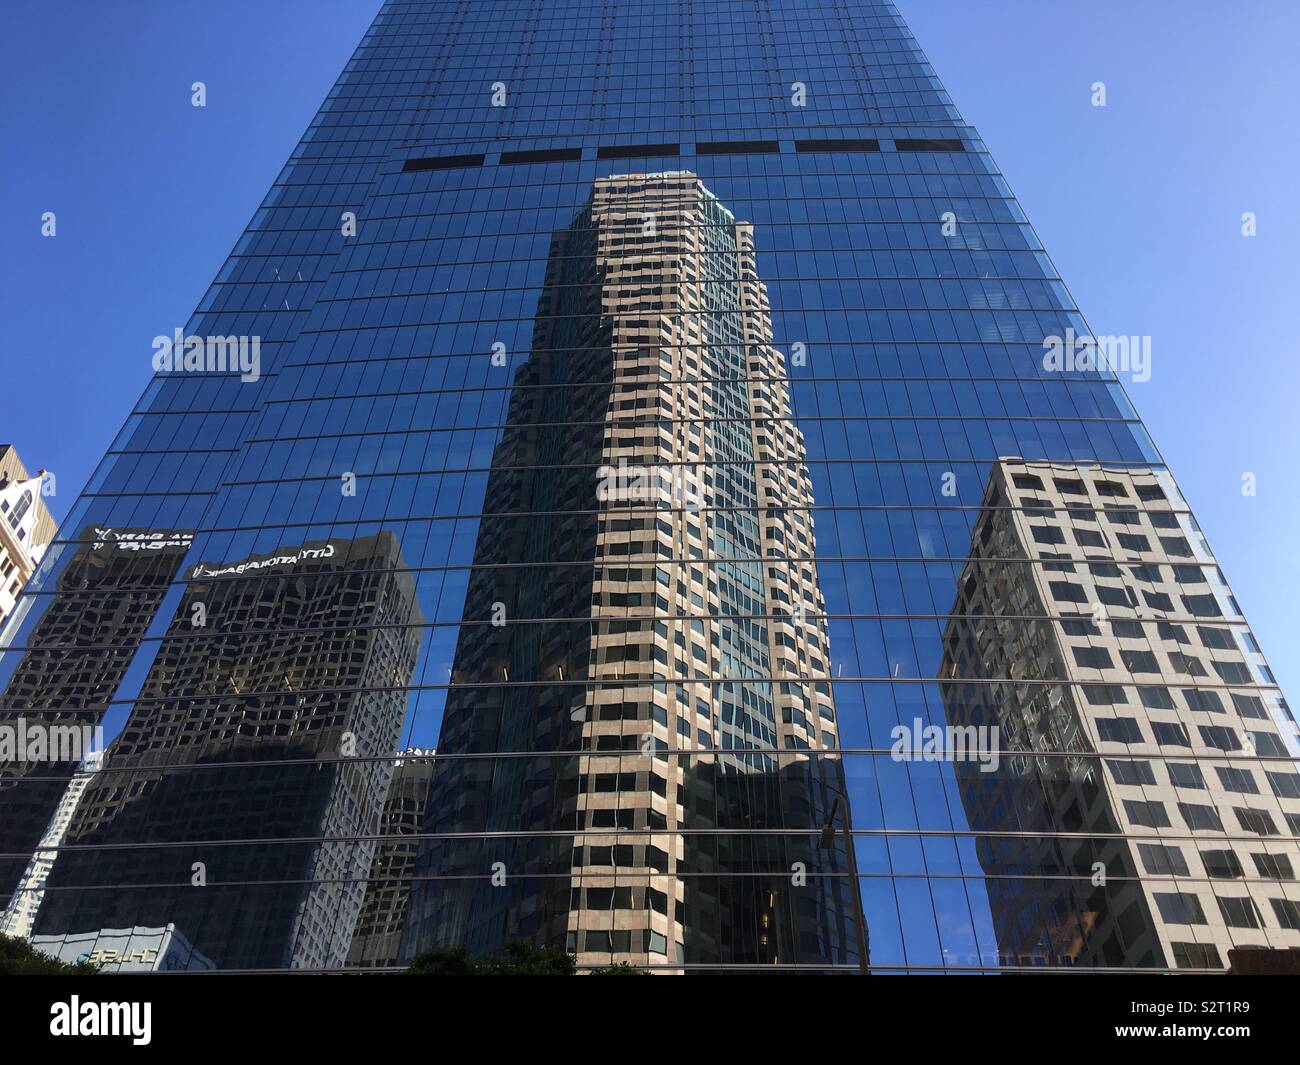 LOS ANGELES, CA, JUN 2019: reflections of neighboring buildings in the windows of the Wilshire Grand skyscraper, Financial District Downtown Stock Photo